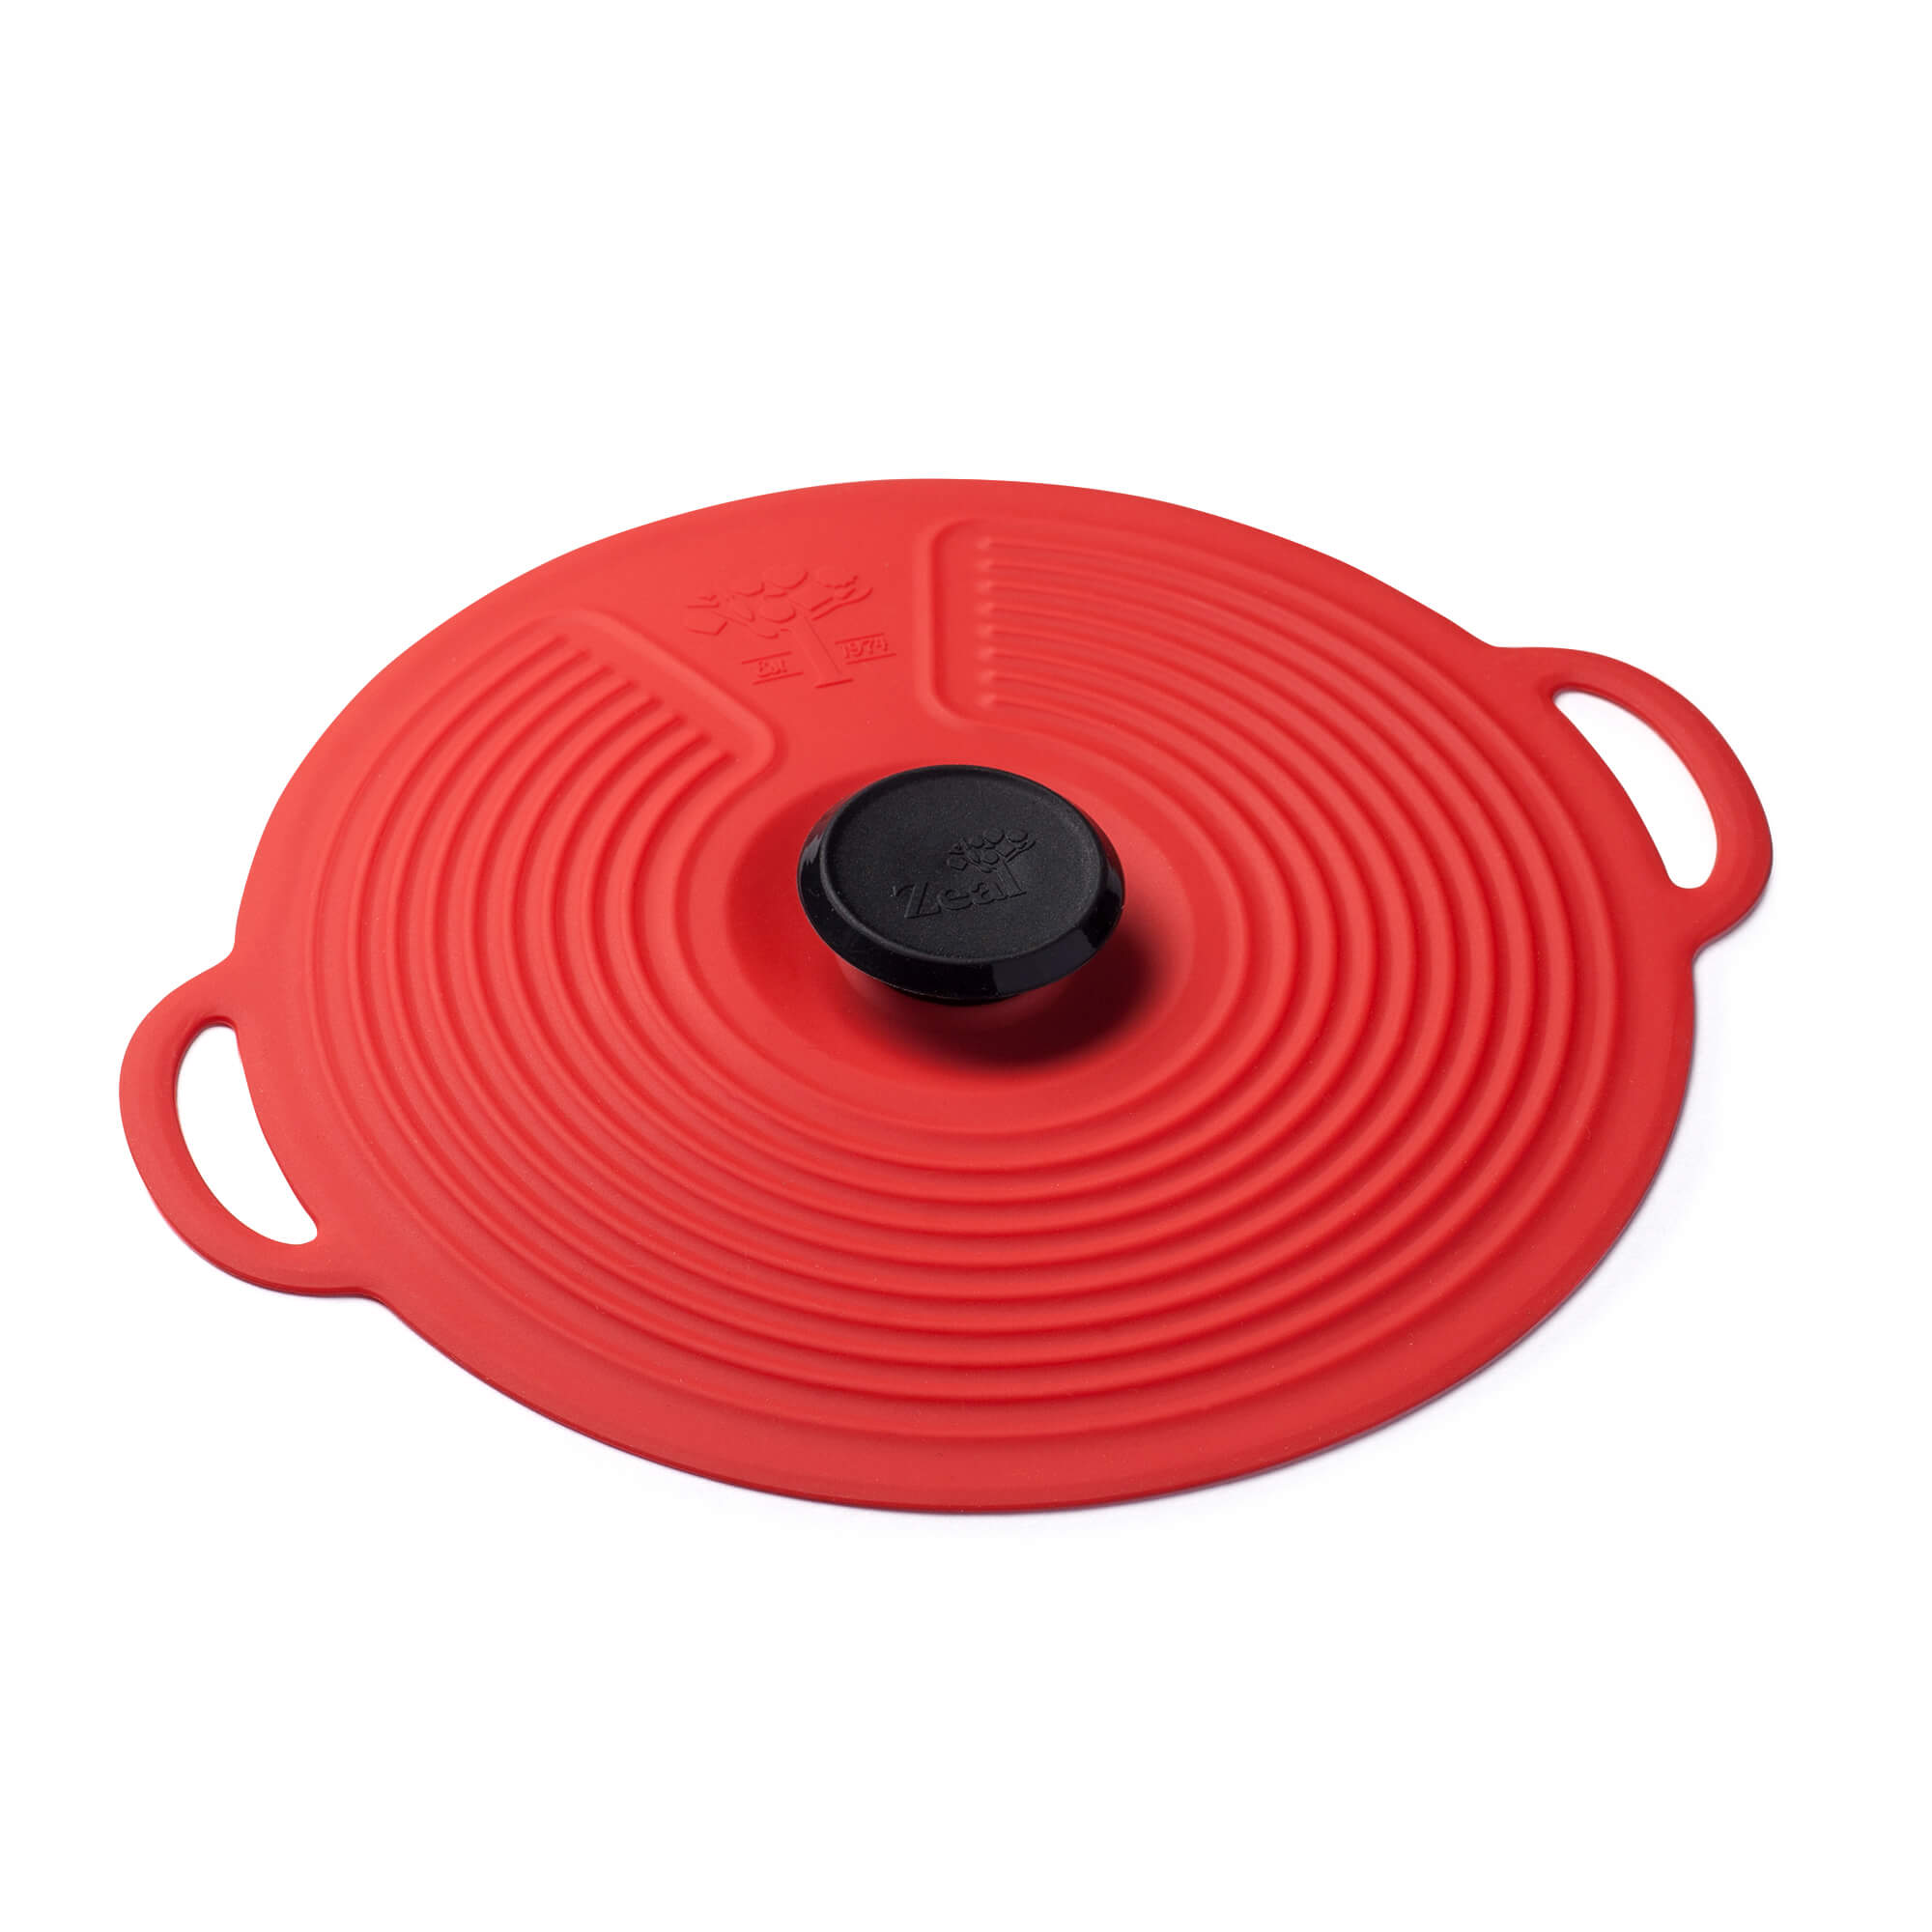 Medium Red Silicone Self Sealing Lid by Zeal